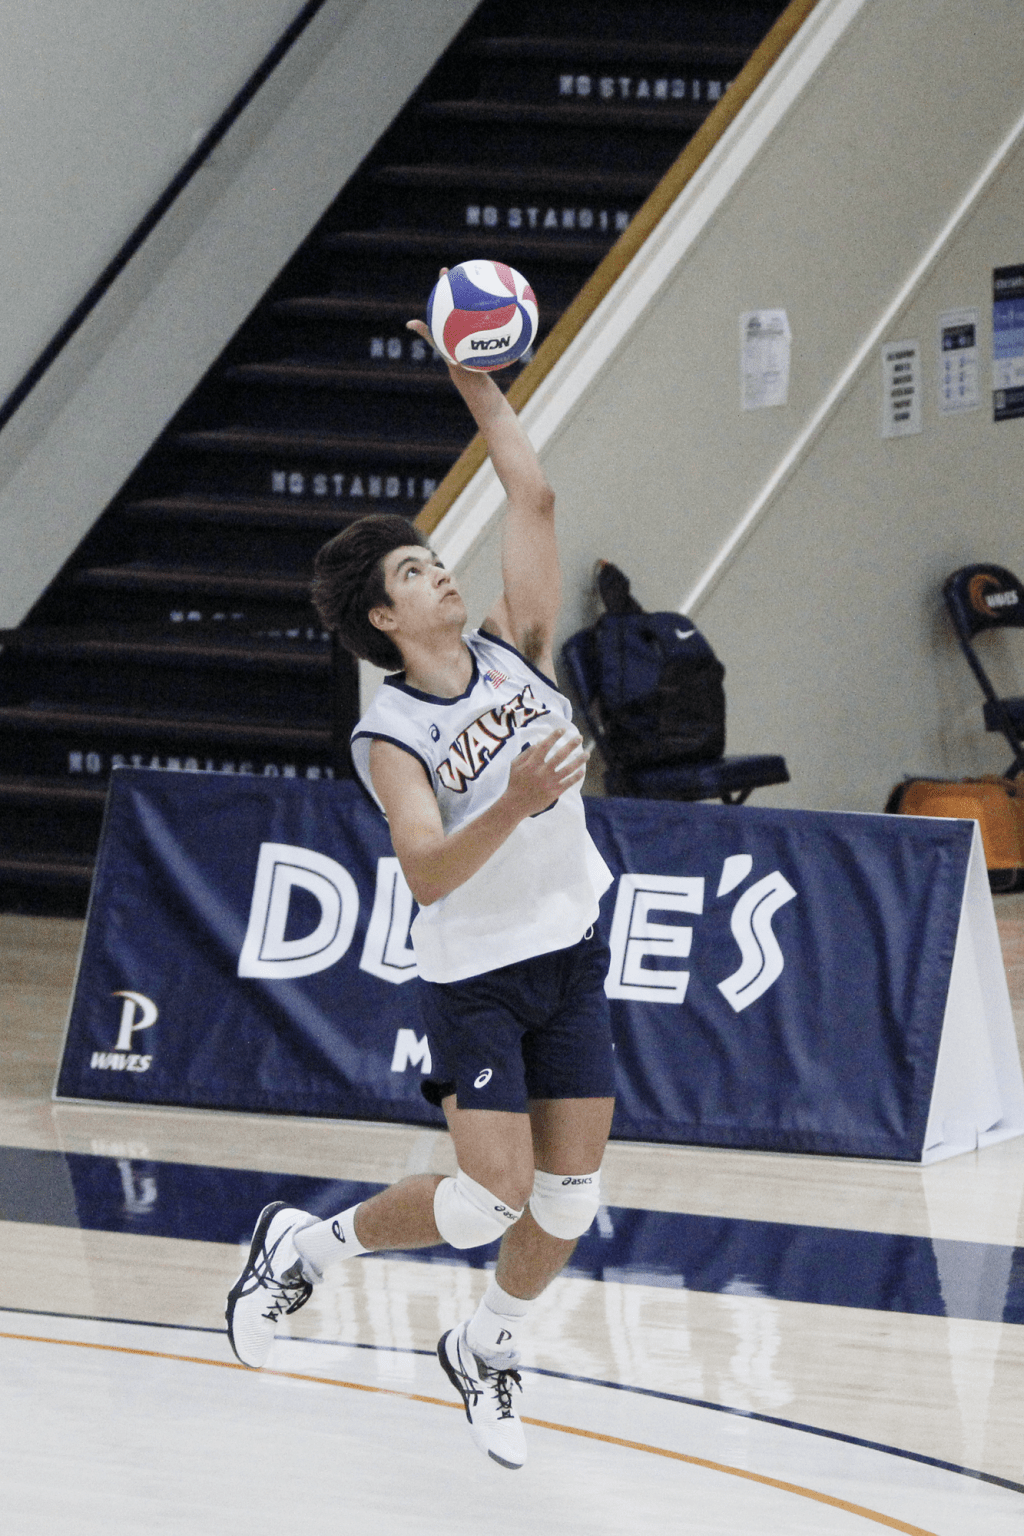 Dvorak serves the ball during the first set on Sunday against GCU at Firestone Fieldhouse. Dvorak earned Mountain Pacific Sports Federation's Defensive Player of the Week for the week of March 29.